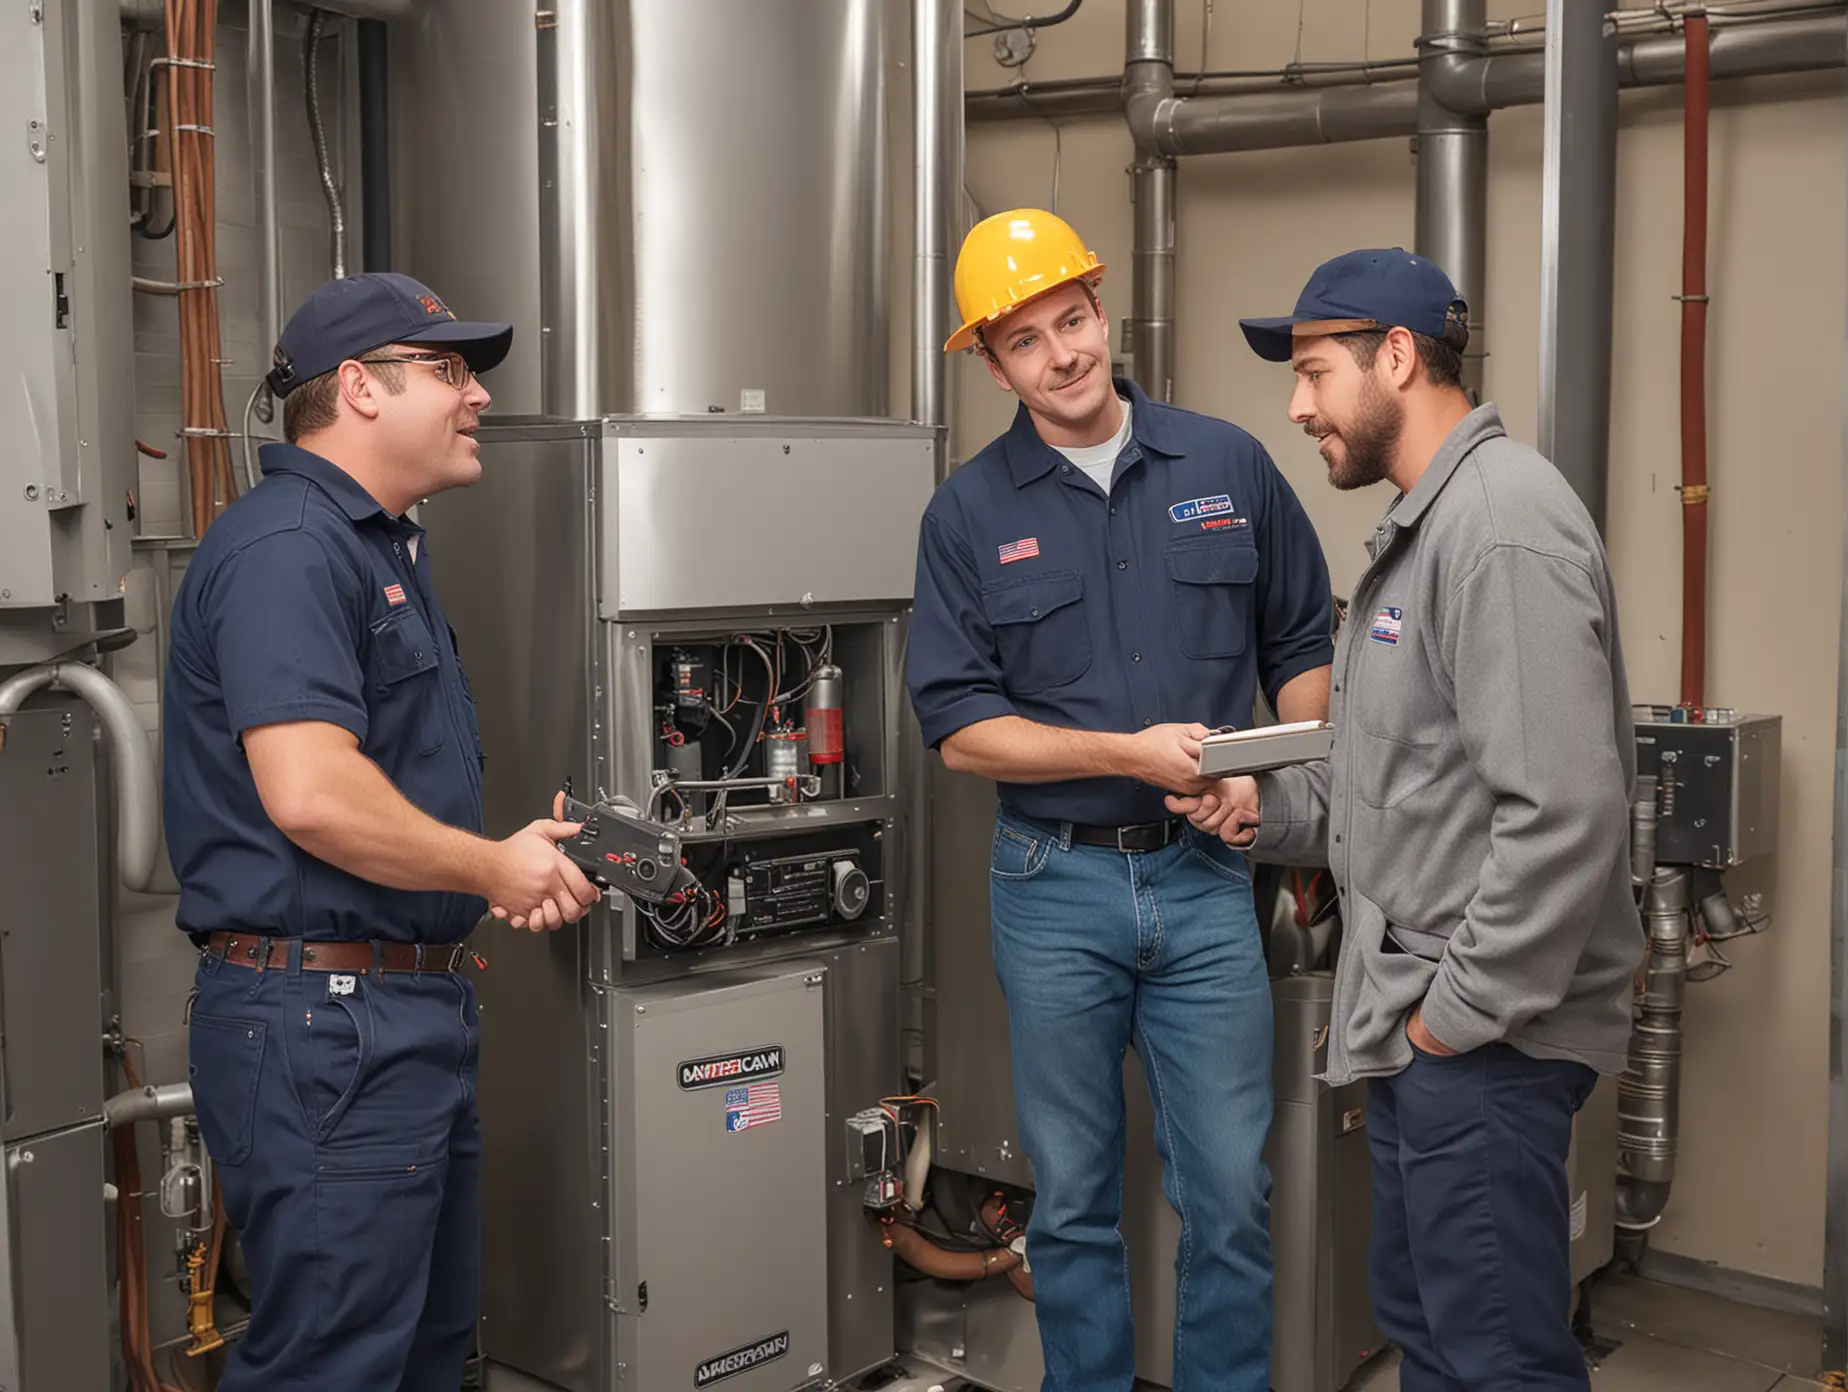 fURNACE Services with American Workers